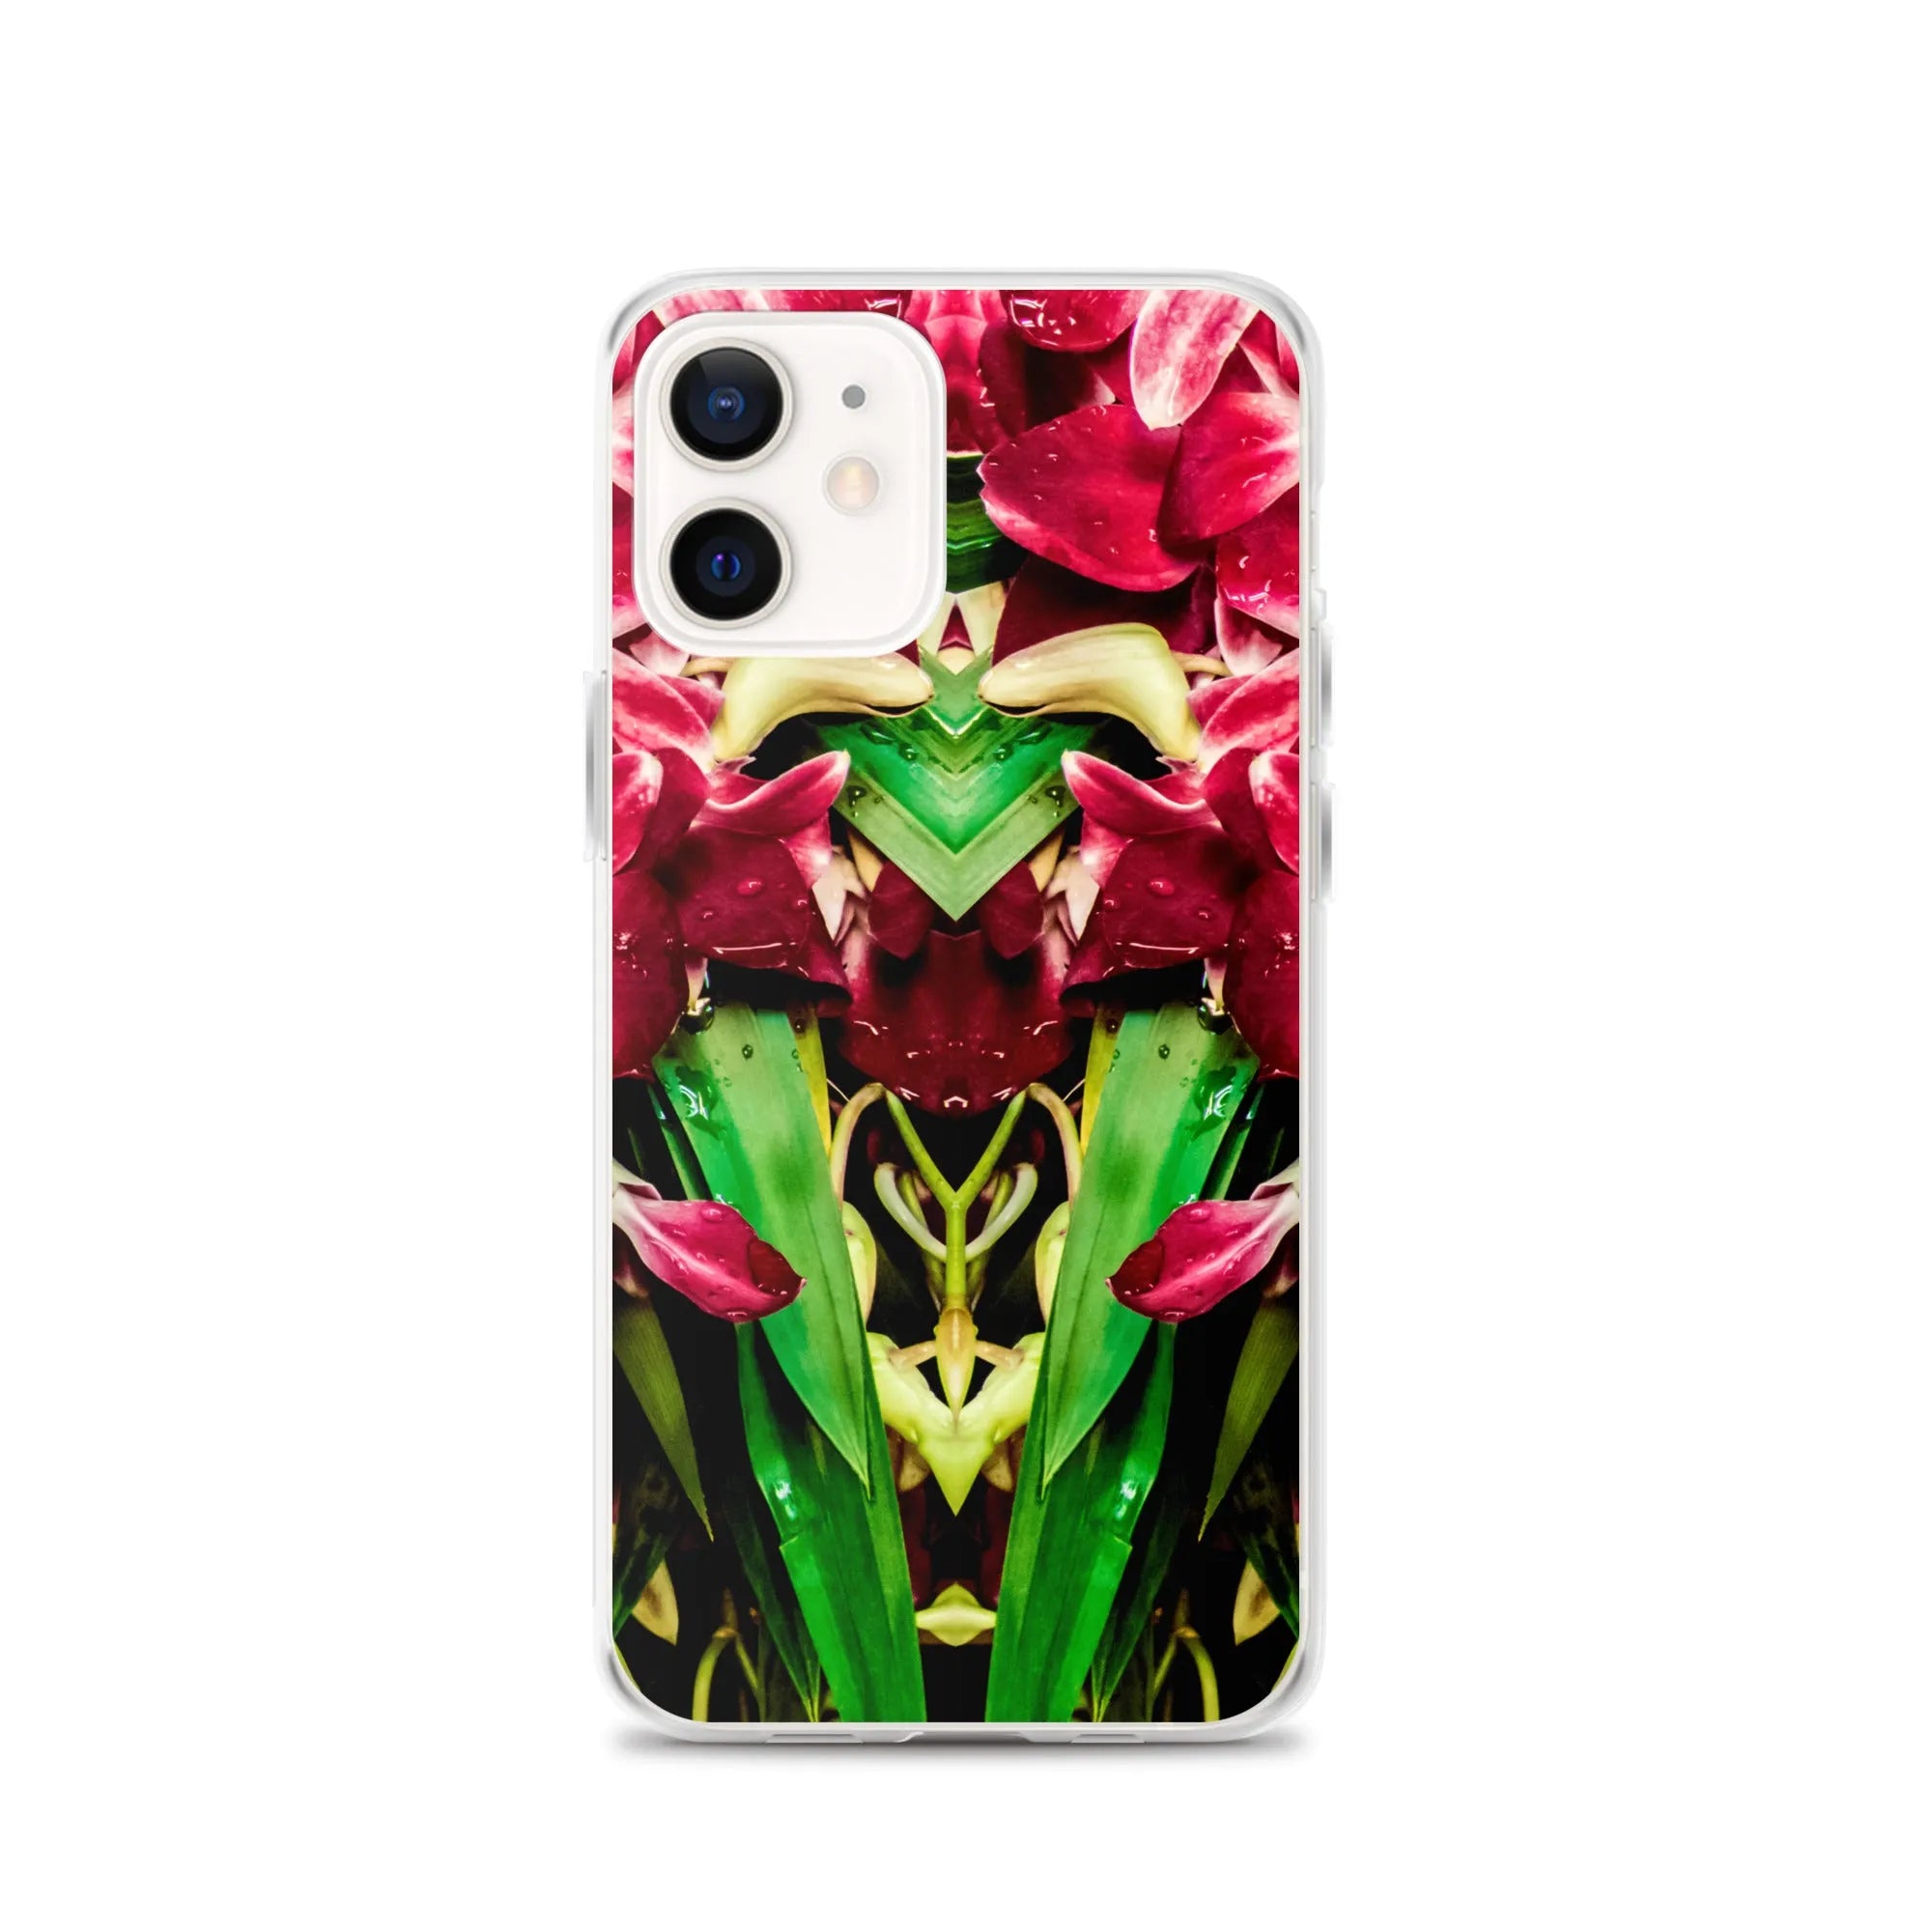 Ruby Reds² Floral Iphone Case - Mobile Phone Cases - Aesthetic Art